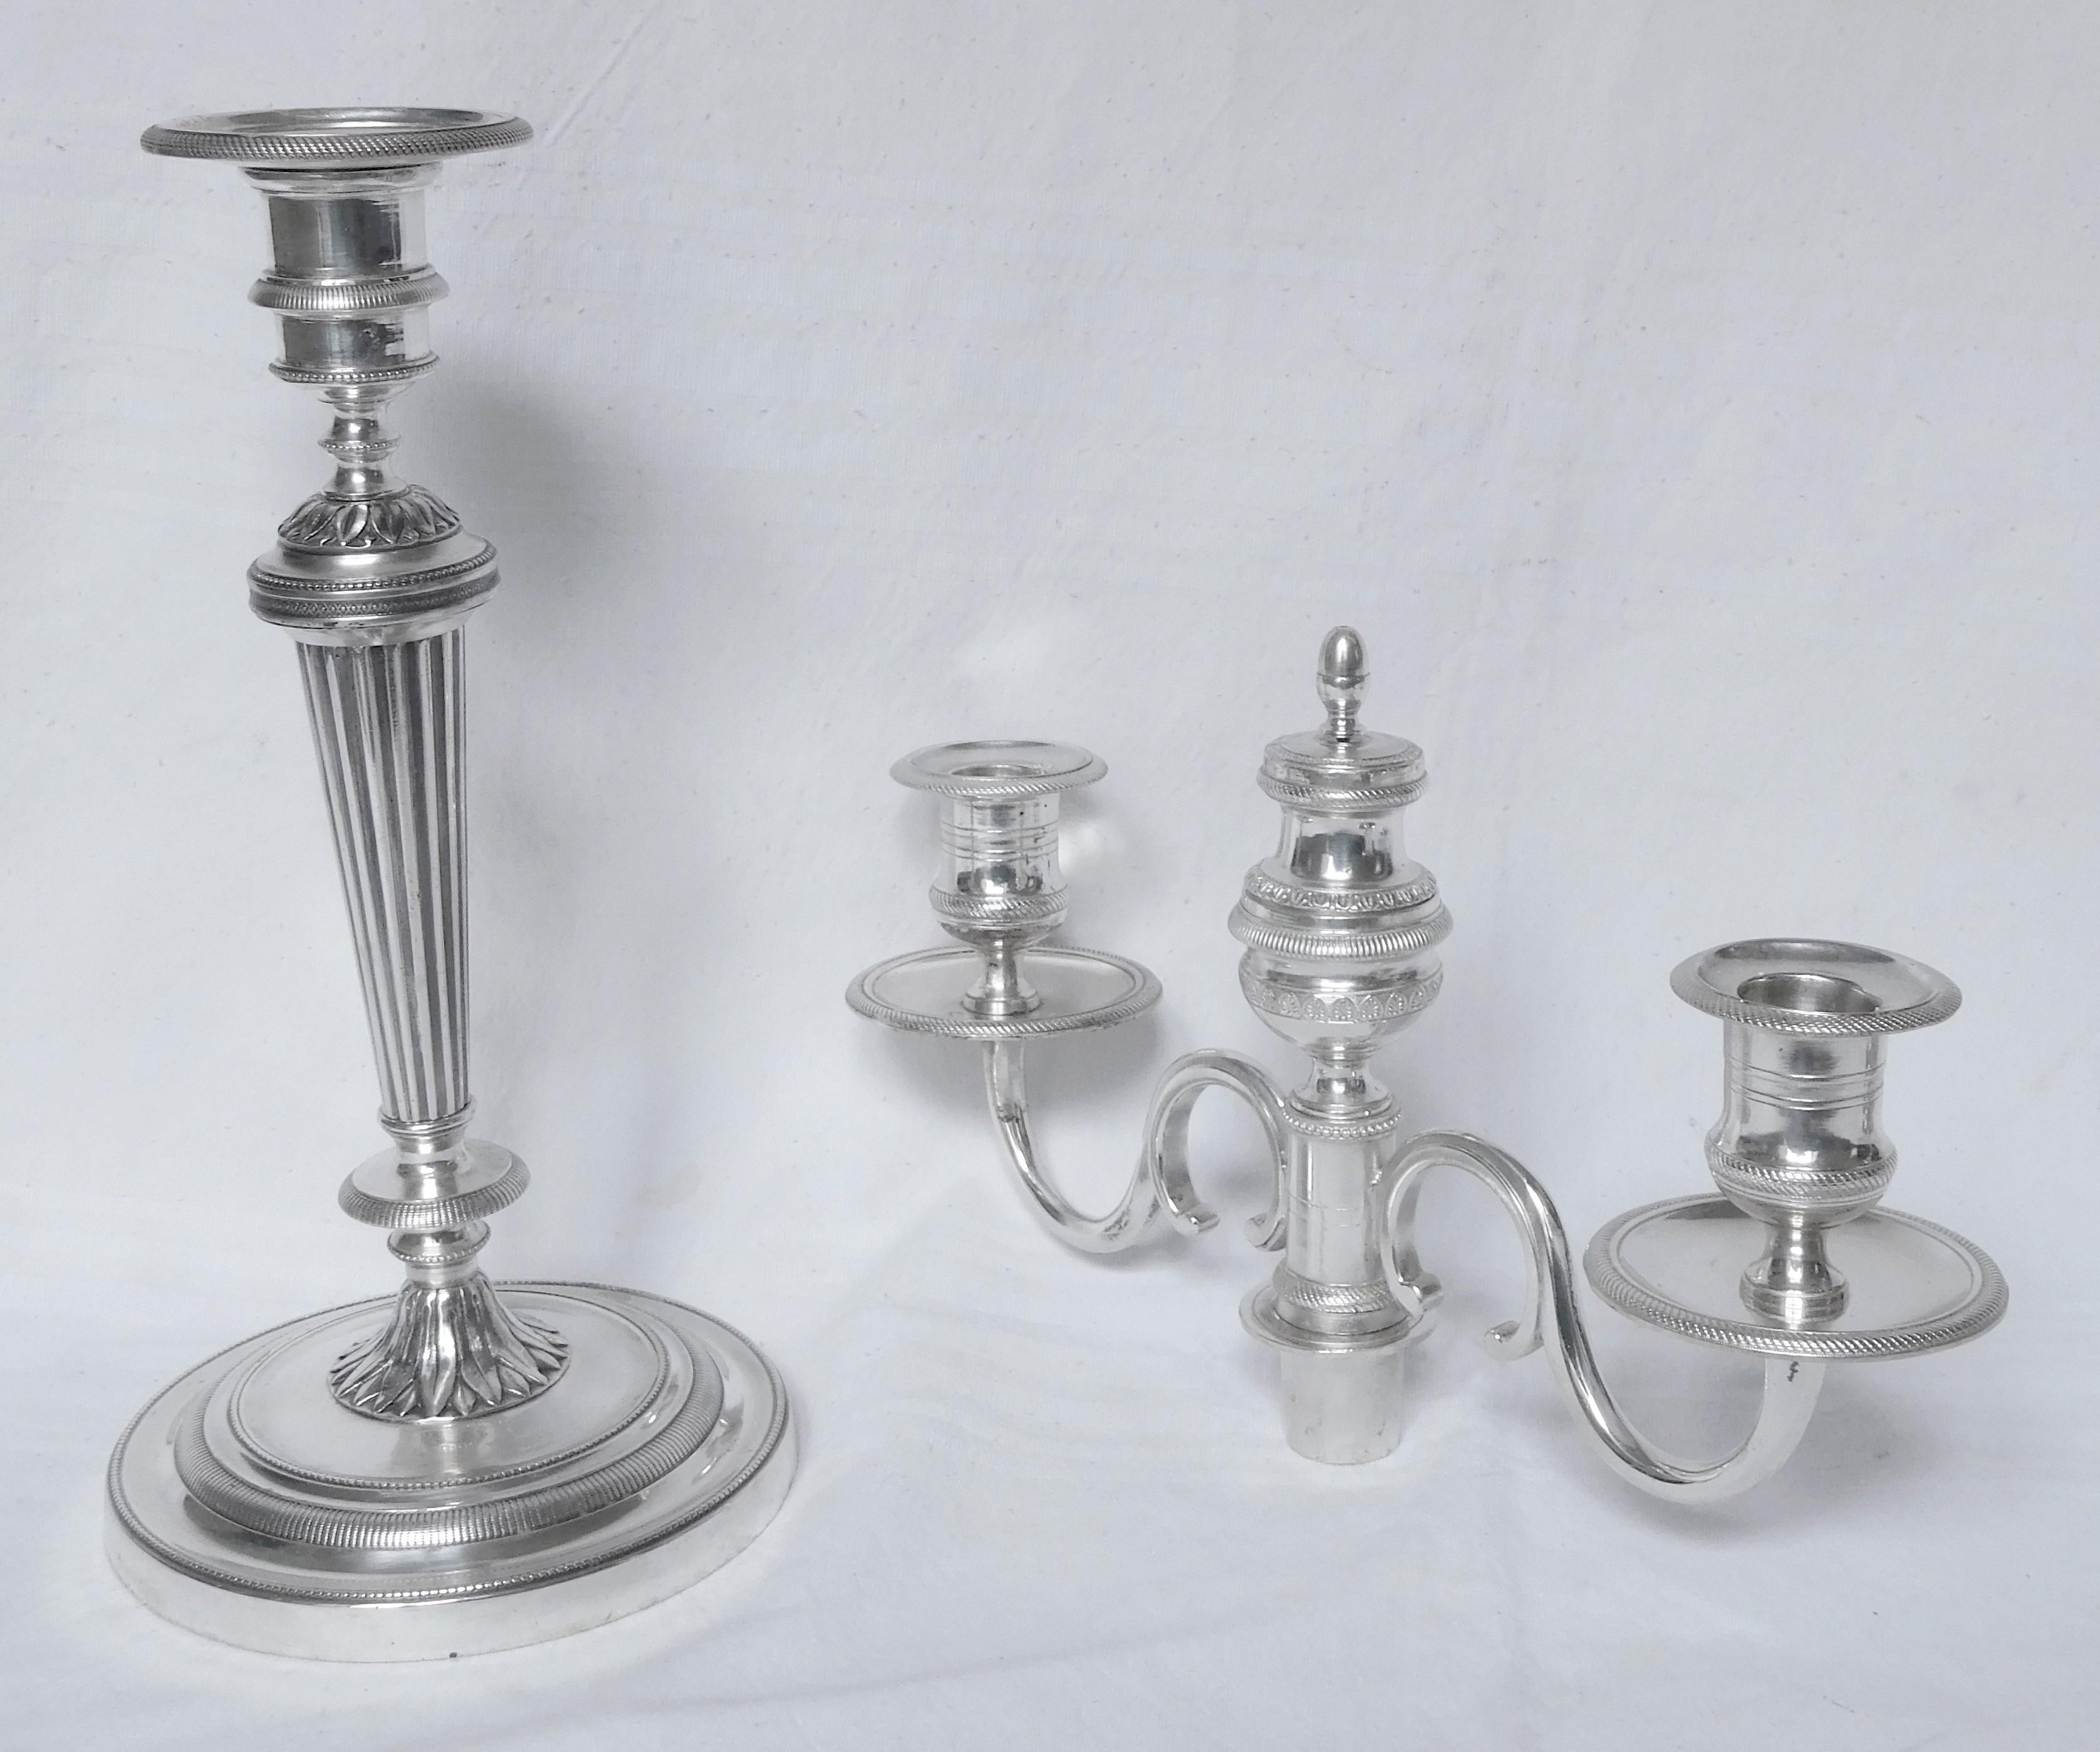 Bronze Pair of Tall Empire silver plate Candelabras by JG Galle - early 19th century For Sale